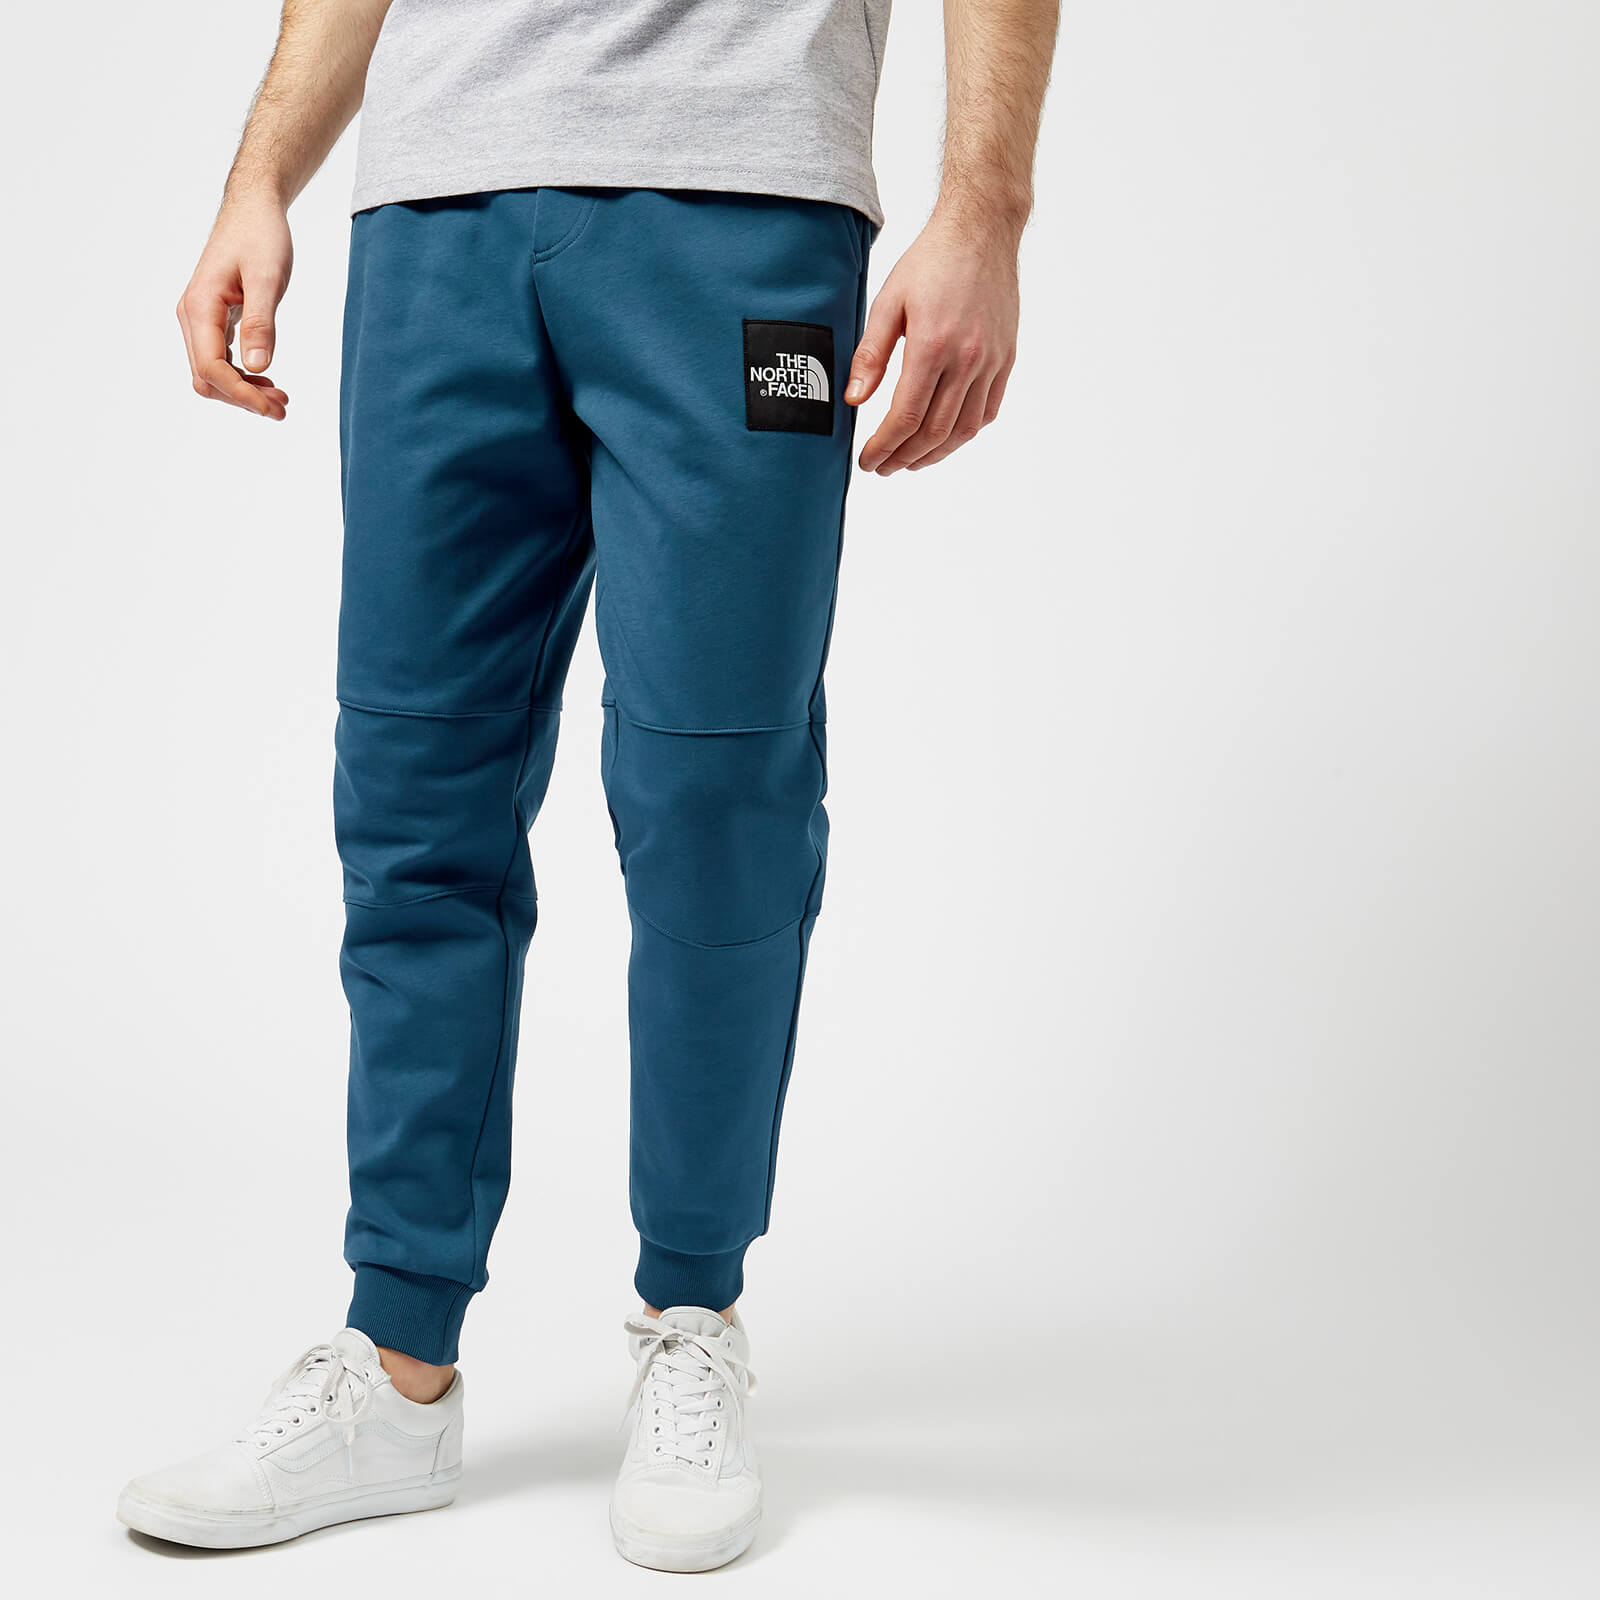 north face fine 2 trousers Online 